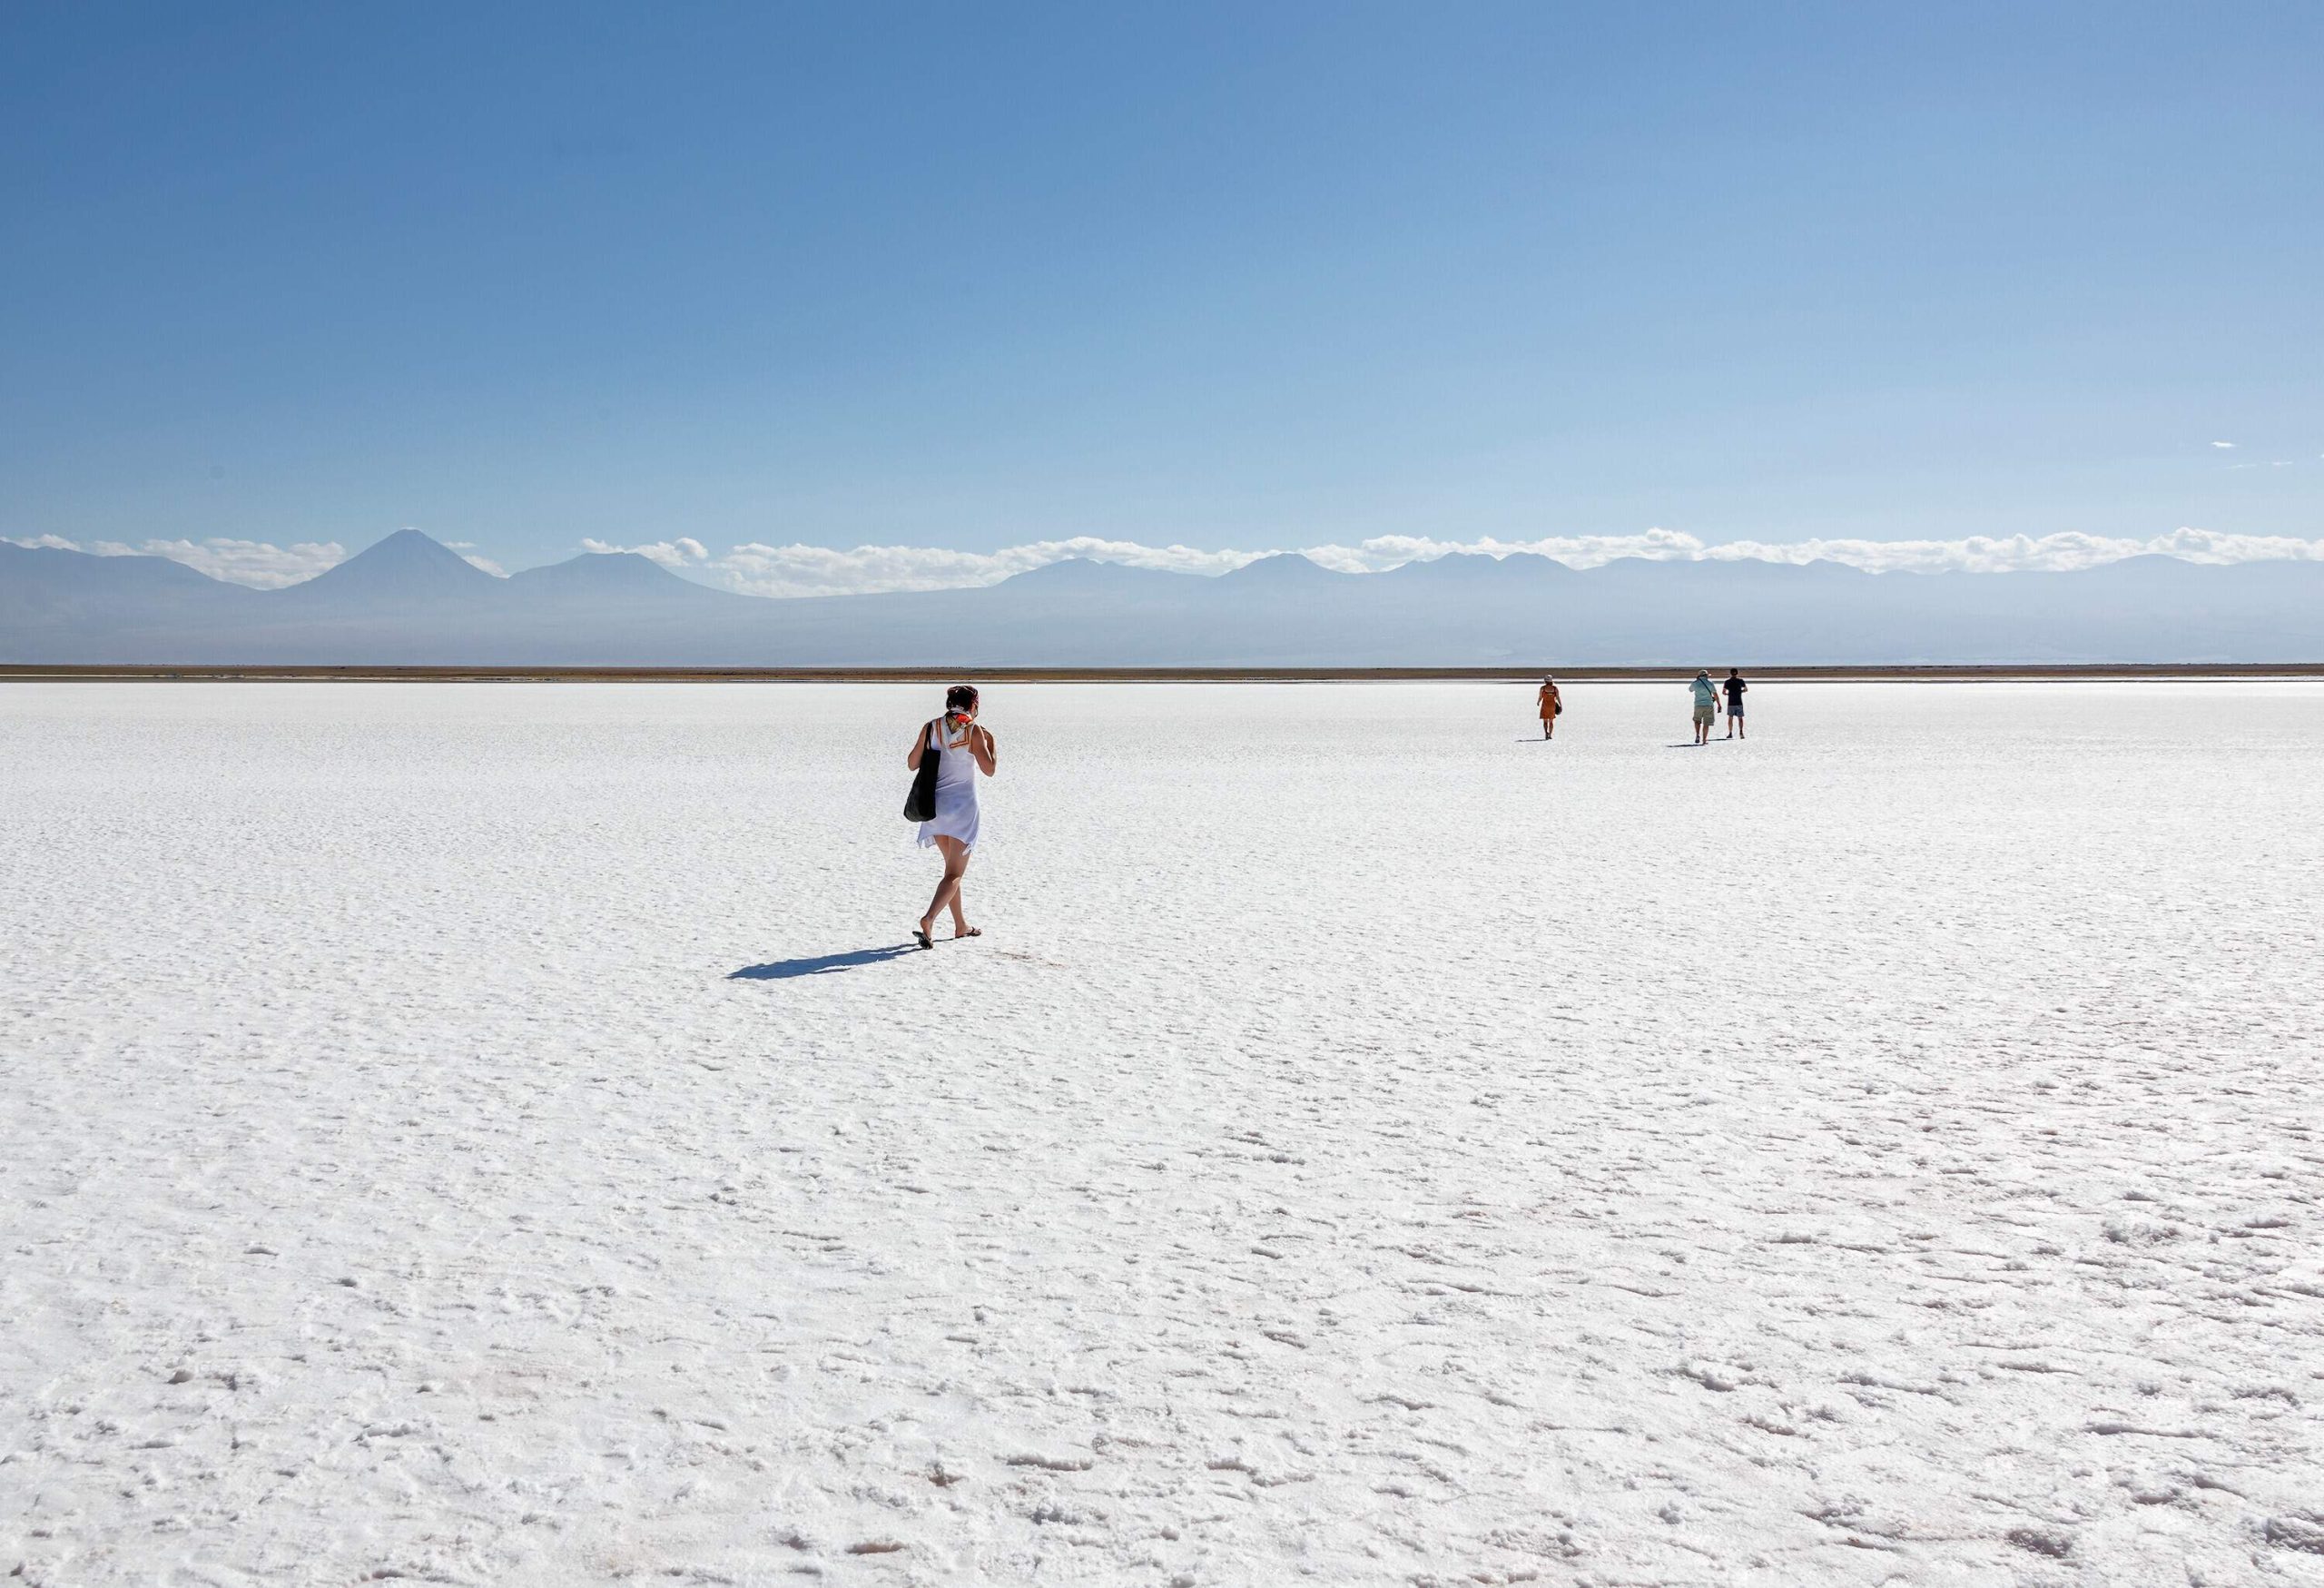 People pass through a white land towards a mountain range covered with clouds from afar under a clear blue sky.